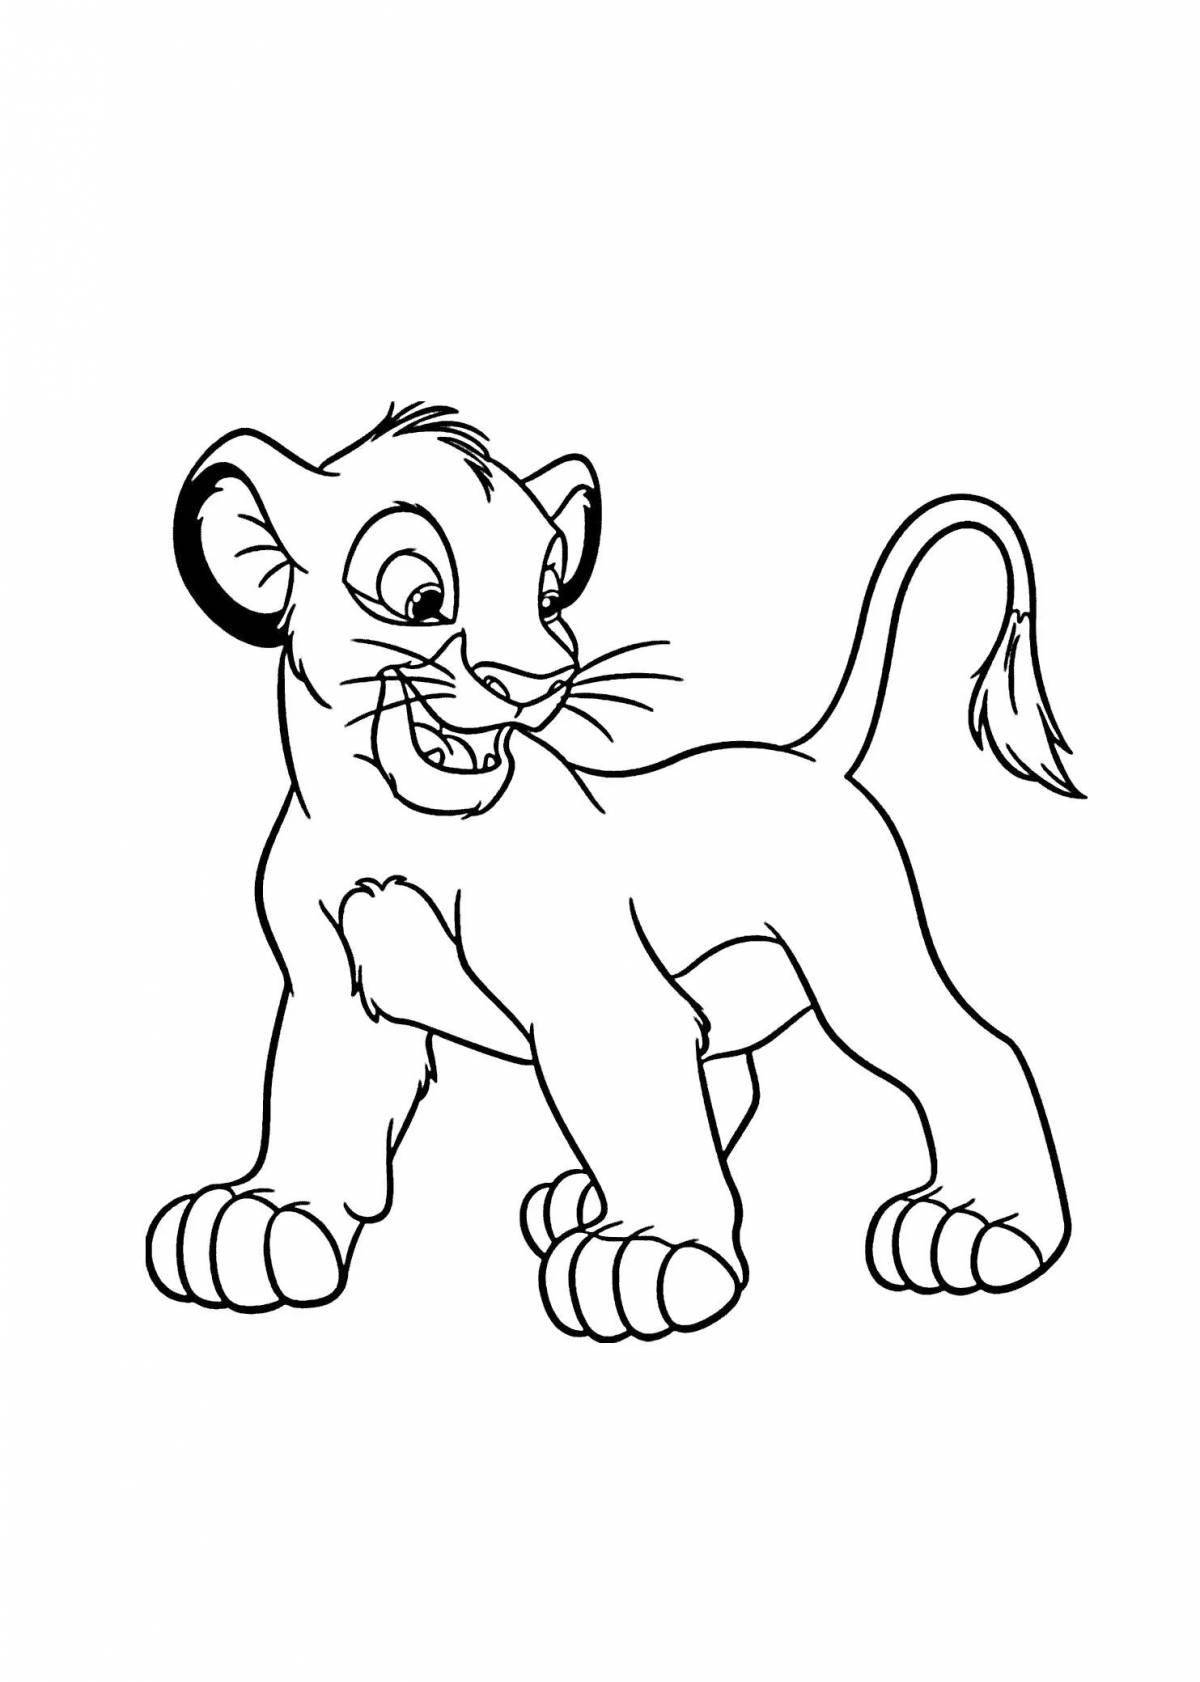 Exquisite lion king coloring book for kids